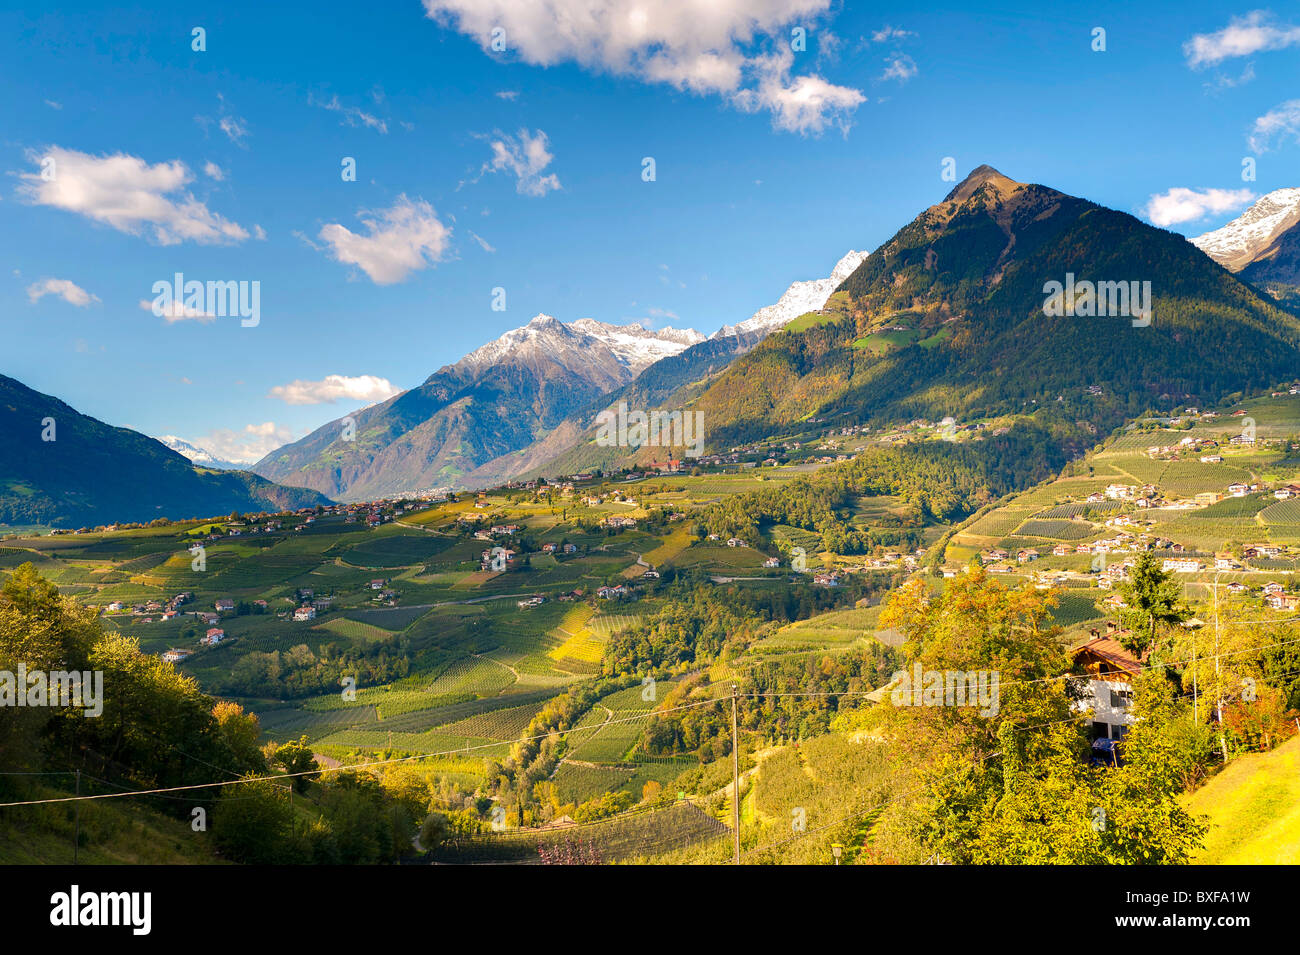 Valley view from the town of Scena, Trentino Alto Adige, Italy Stock Photo